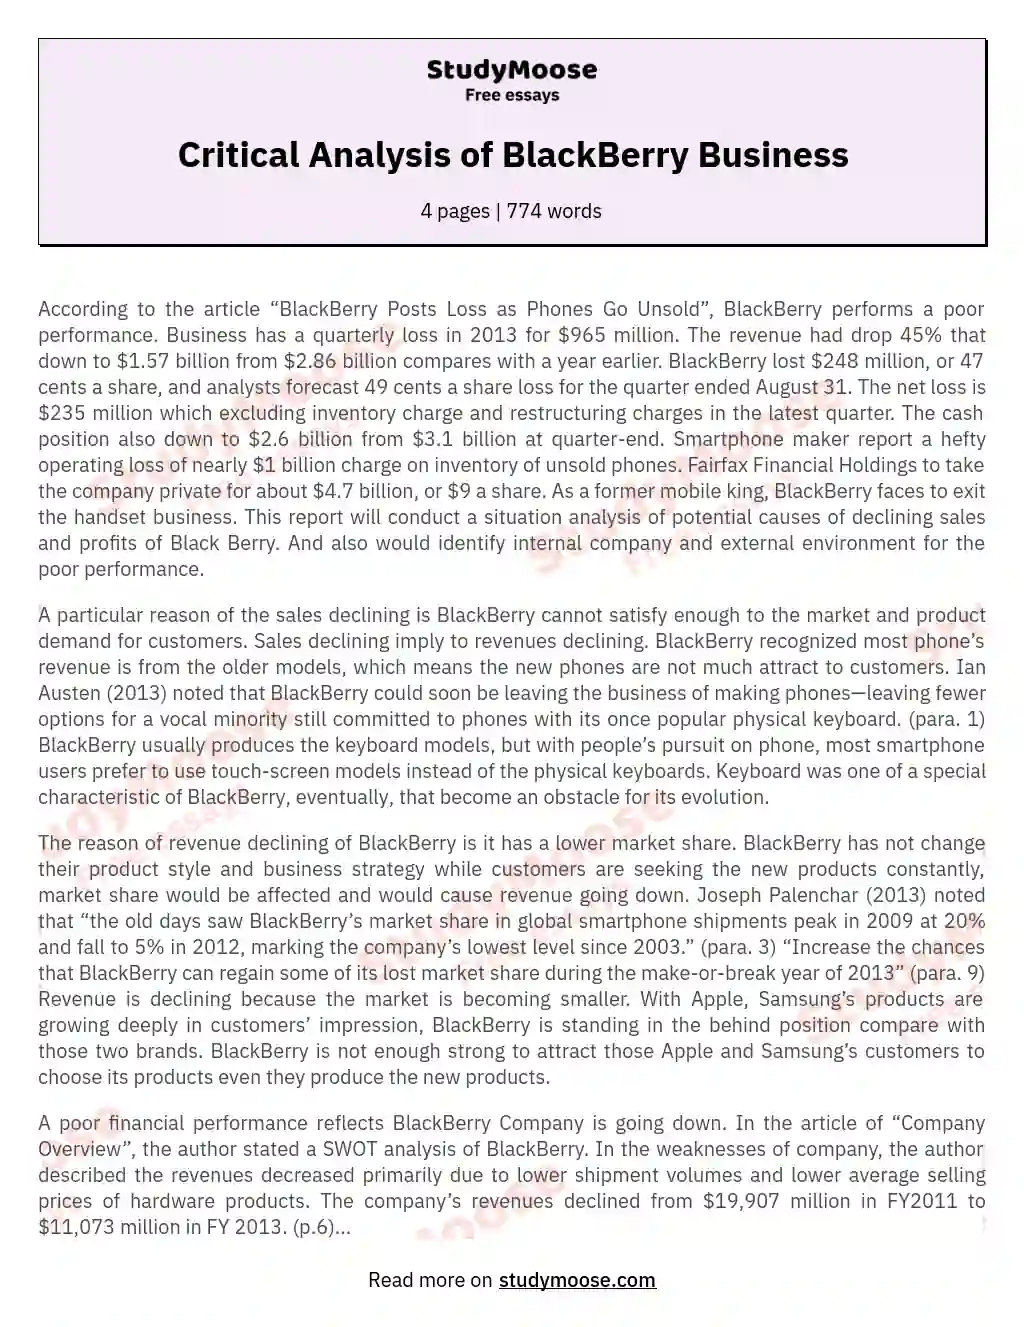 Critical Analysis of BlackBerry Business essay